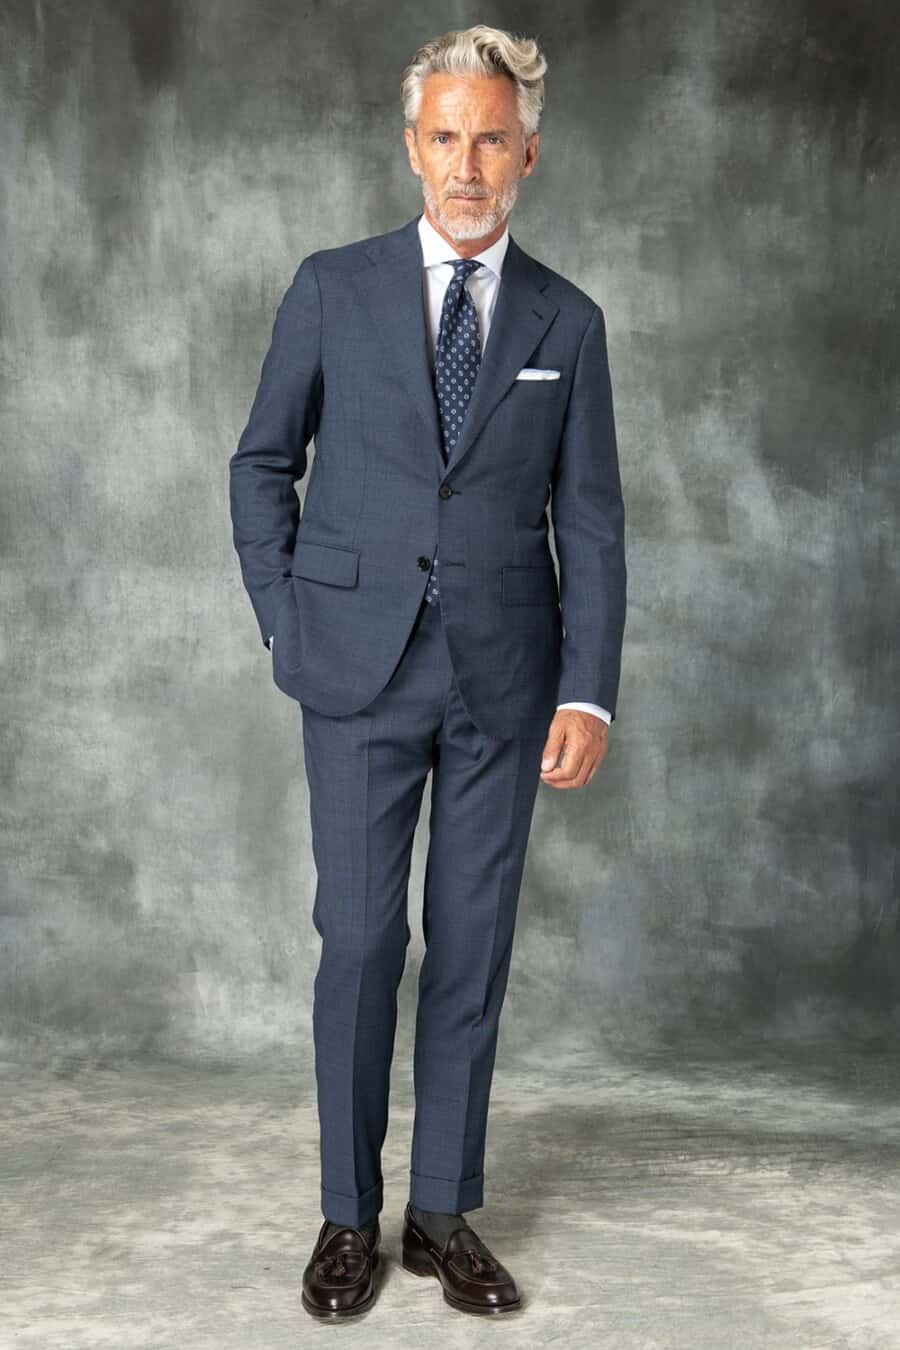 Men's blue lounge suit, white shirt, patterned navy tie, dark socks and dark brown leather tassel loafers outfit